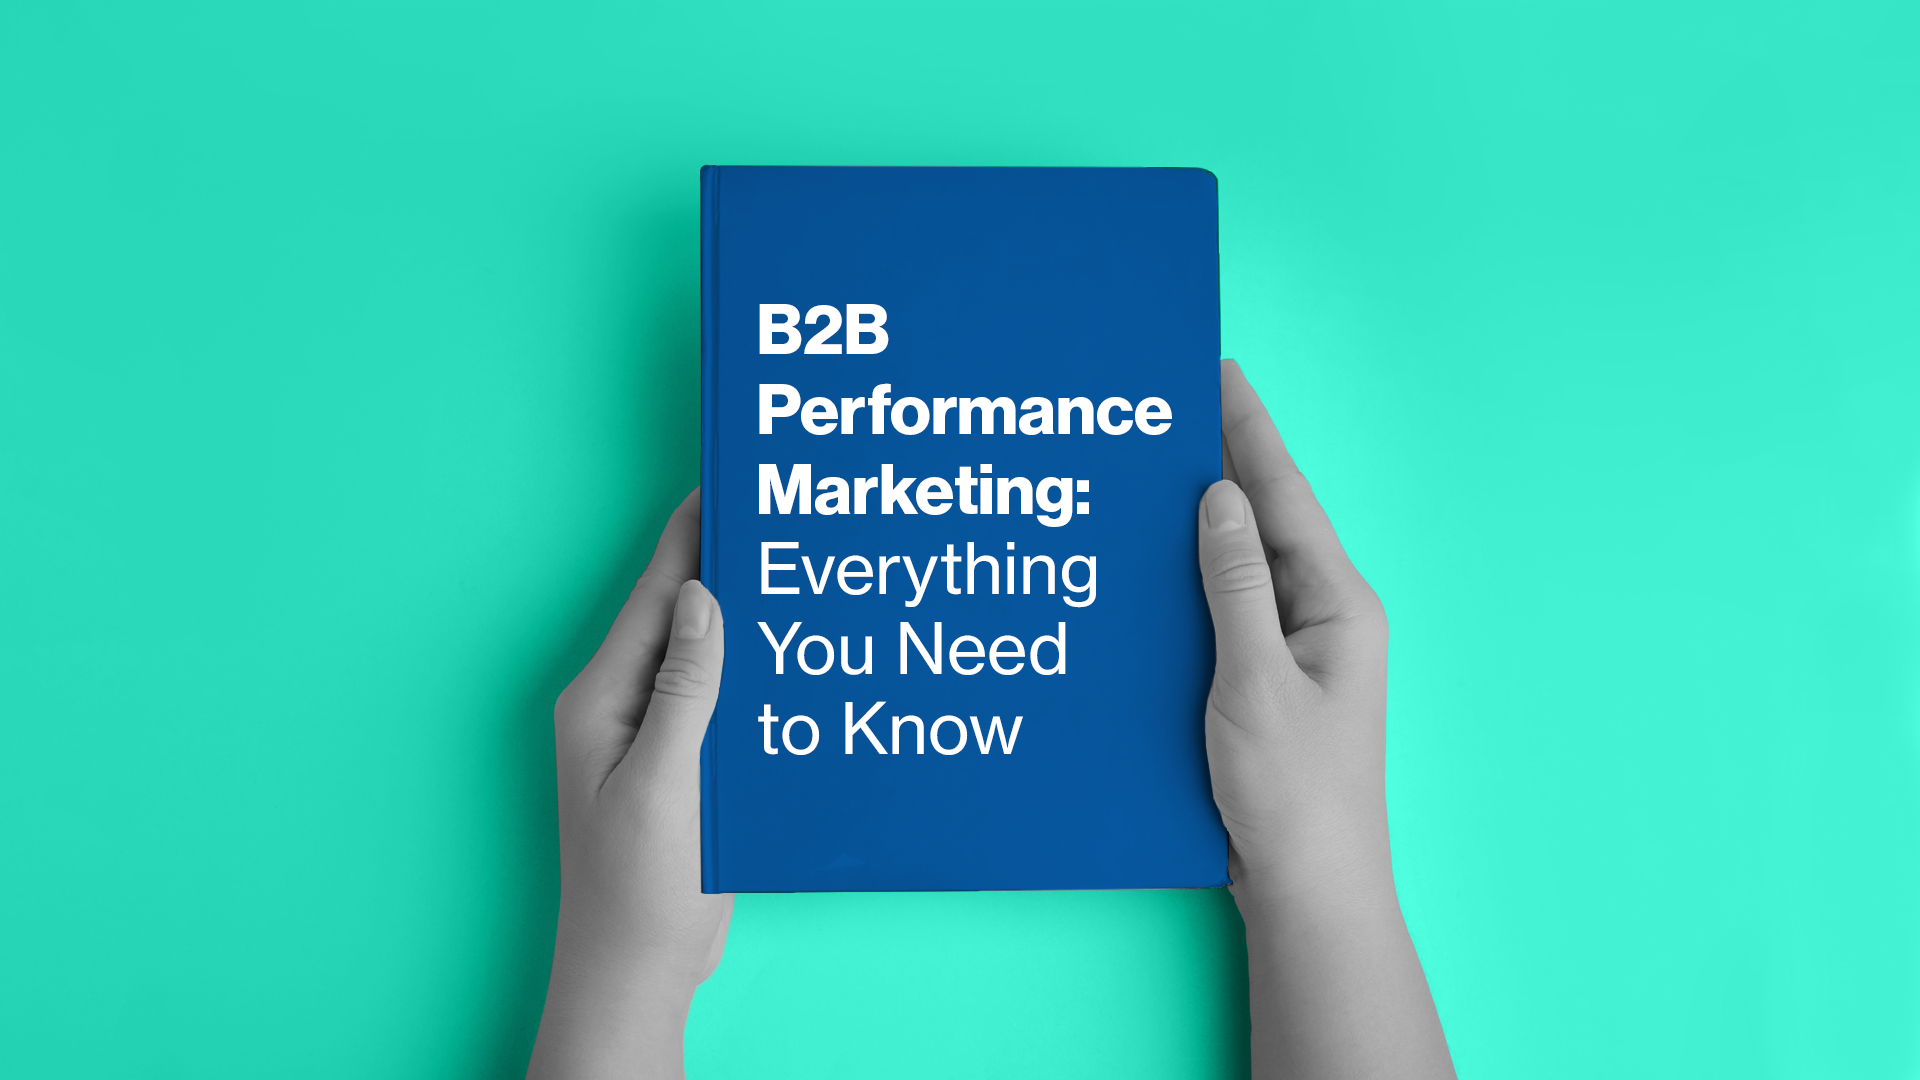 B2B Performance Marketing: Everything You Need to Know